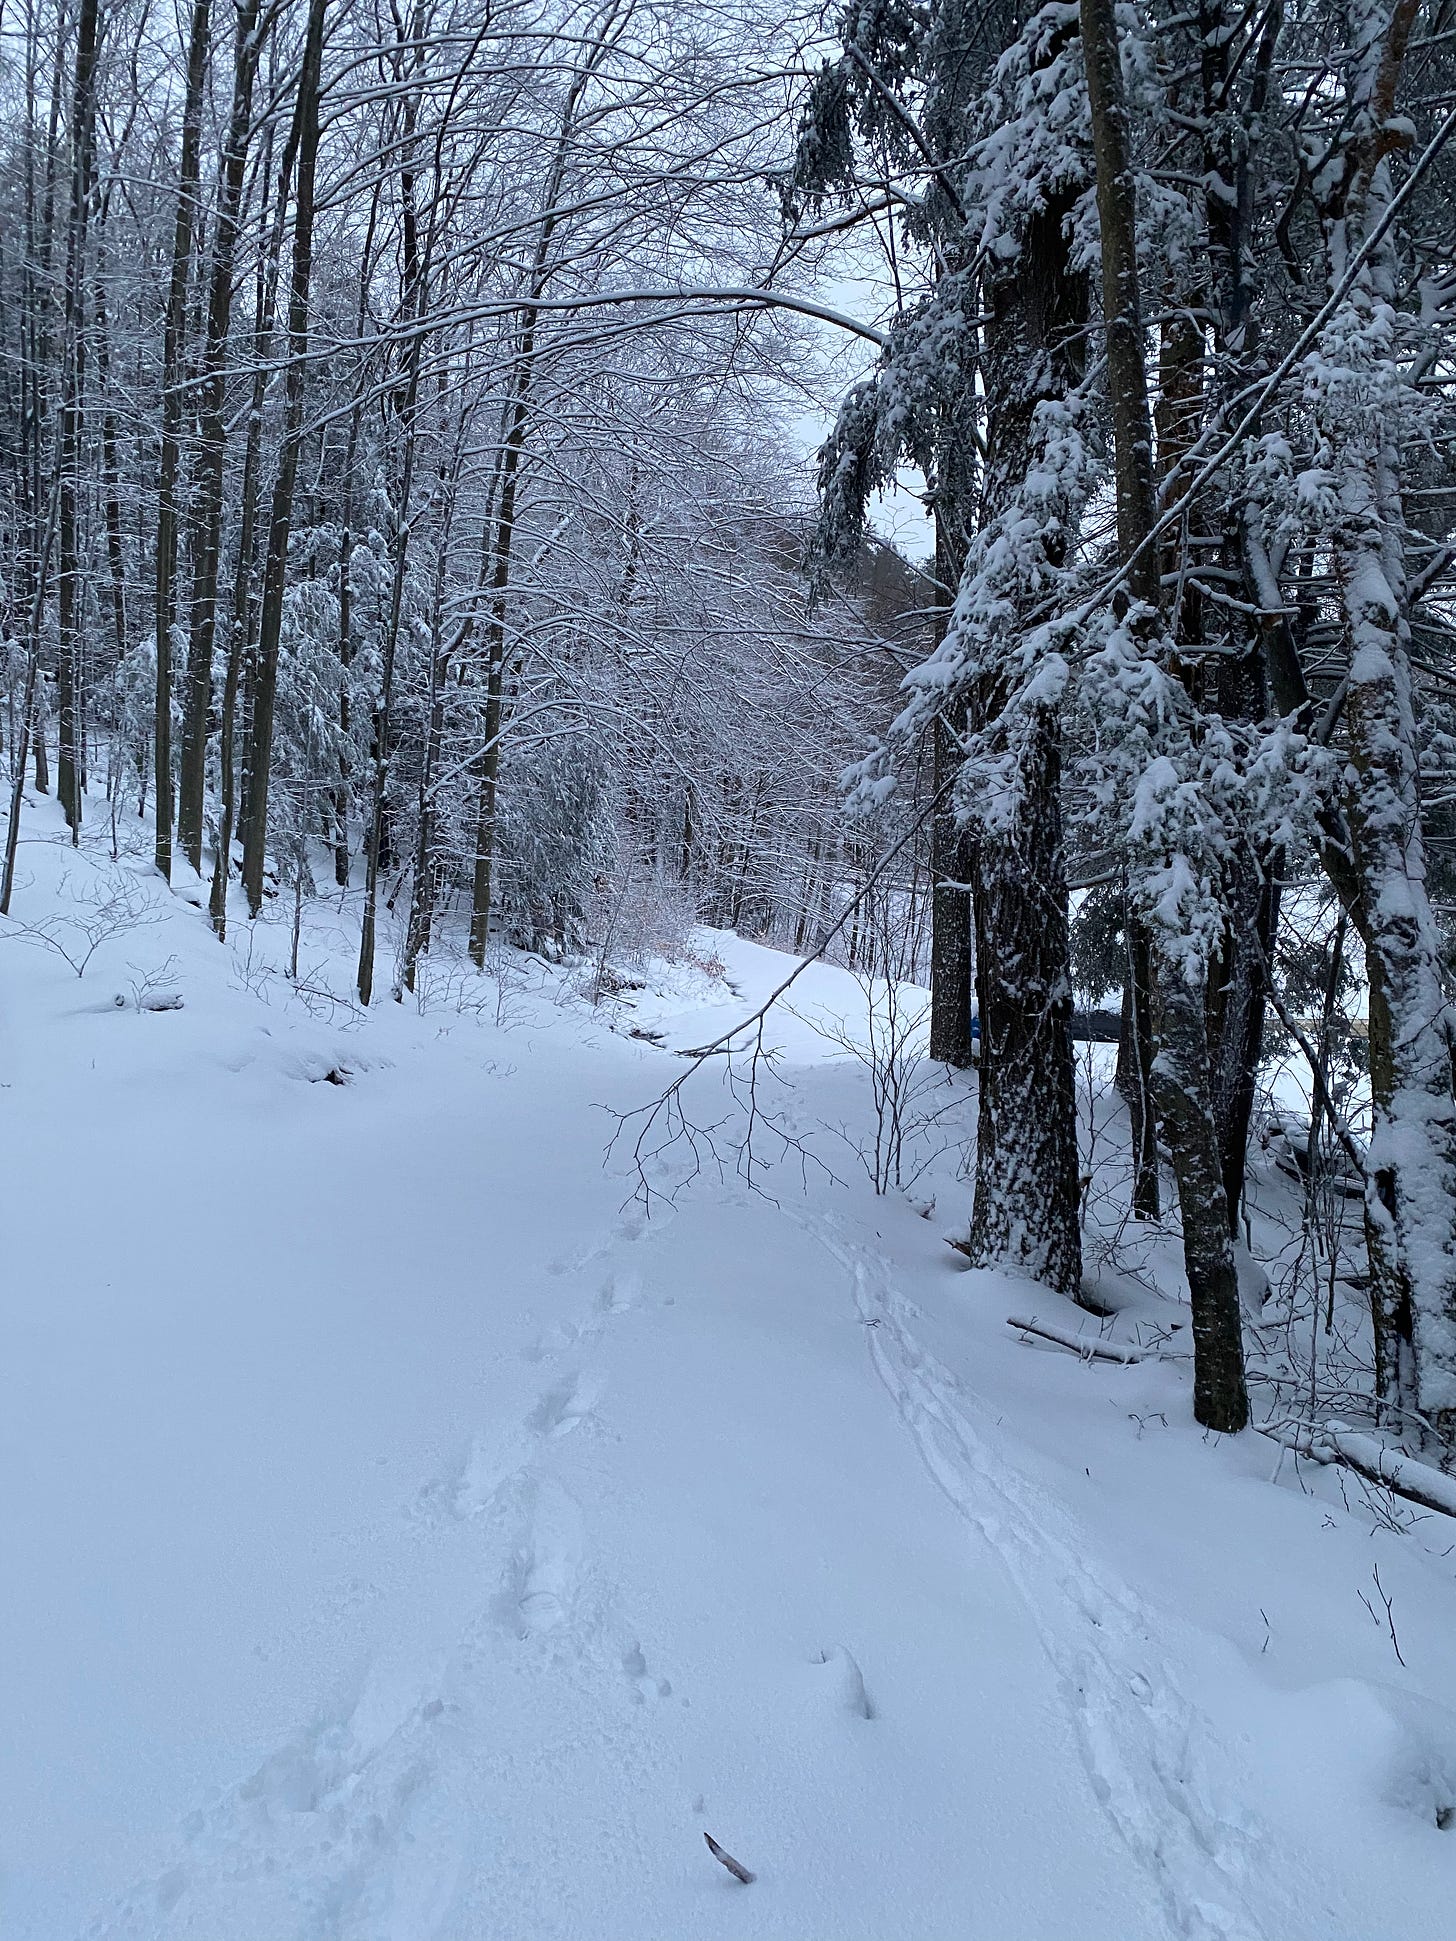 Two sets of tracks—mine and Nessa’s on a snowy path in the woods.